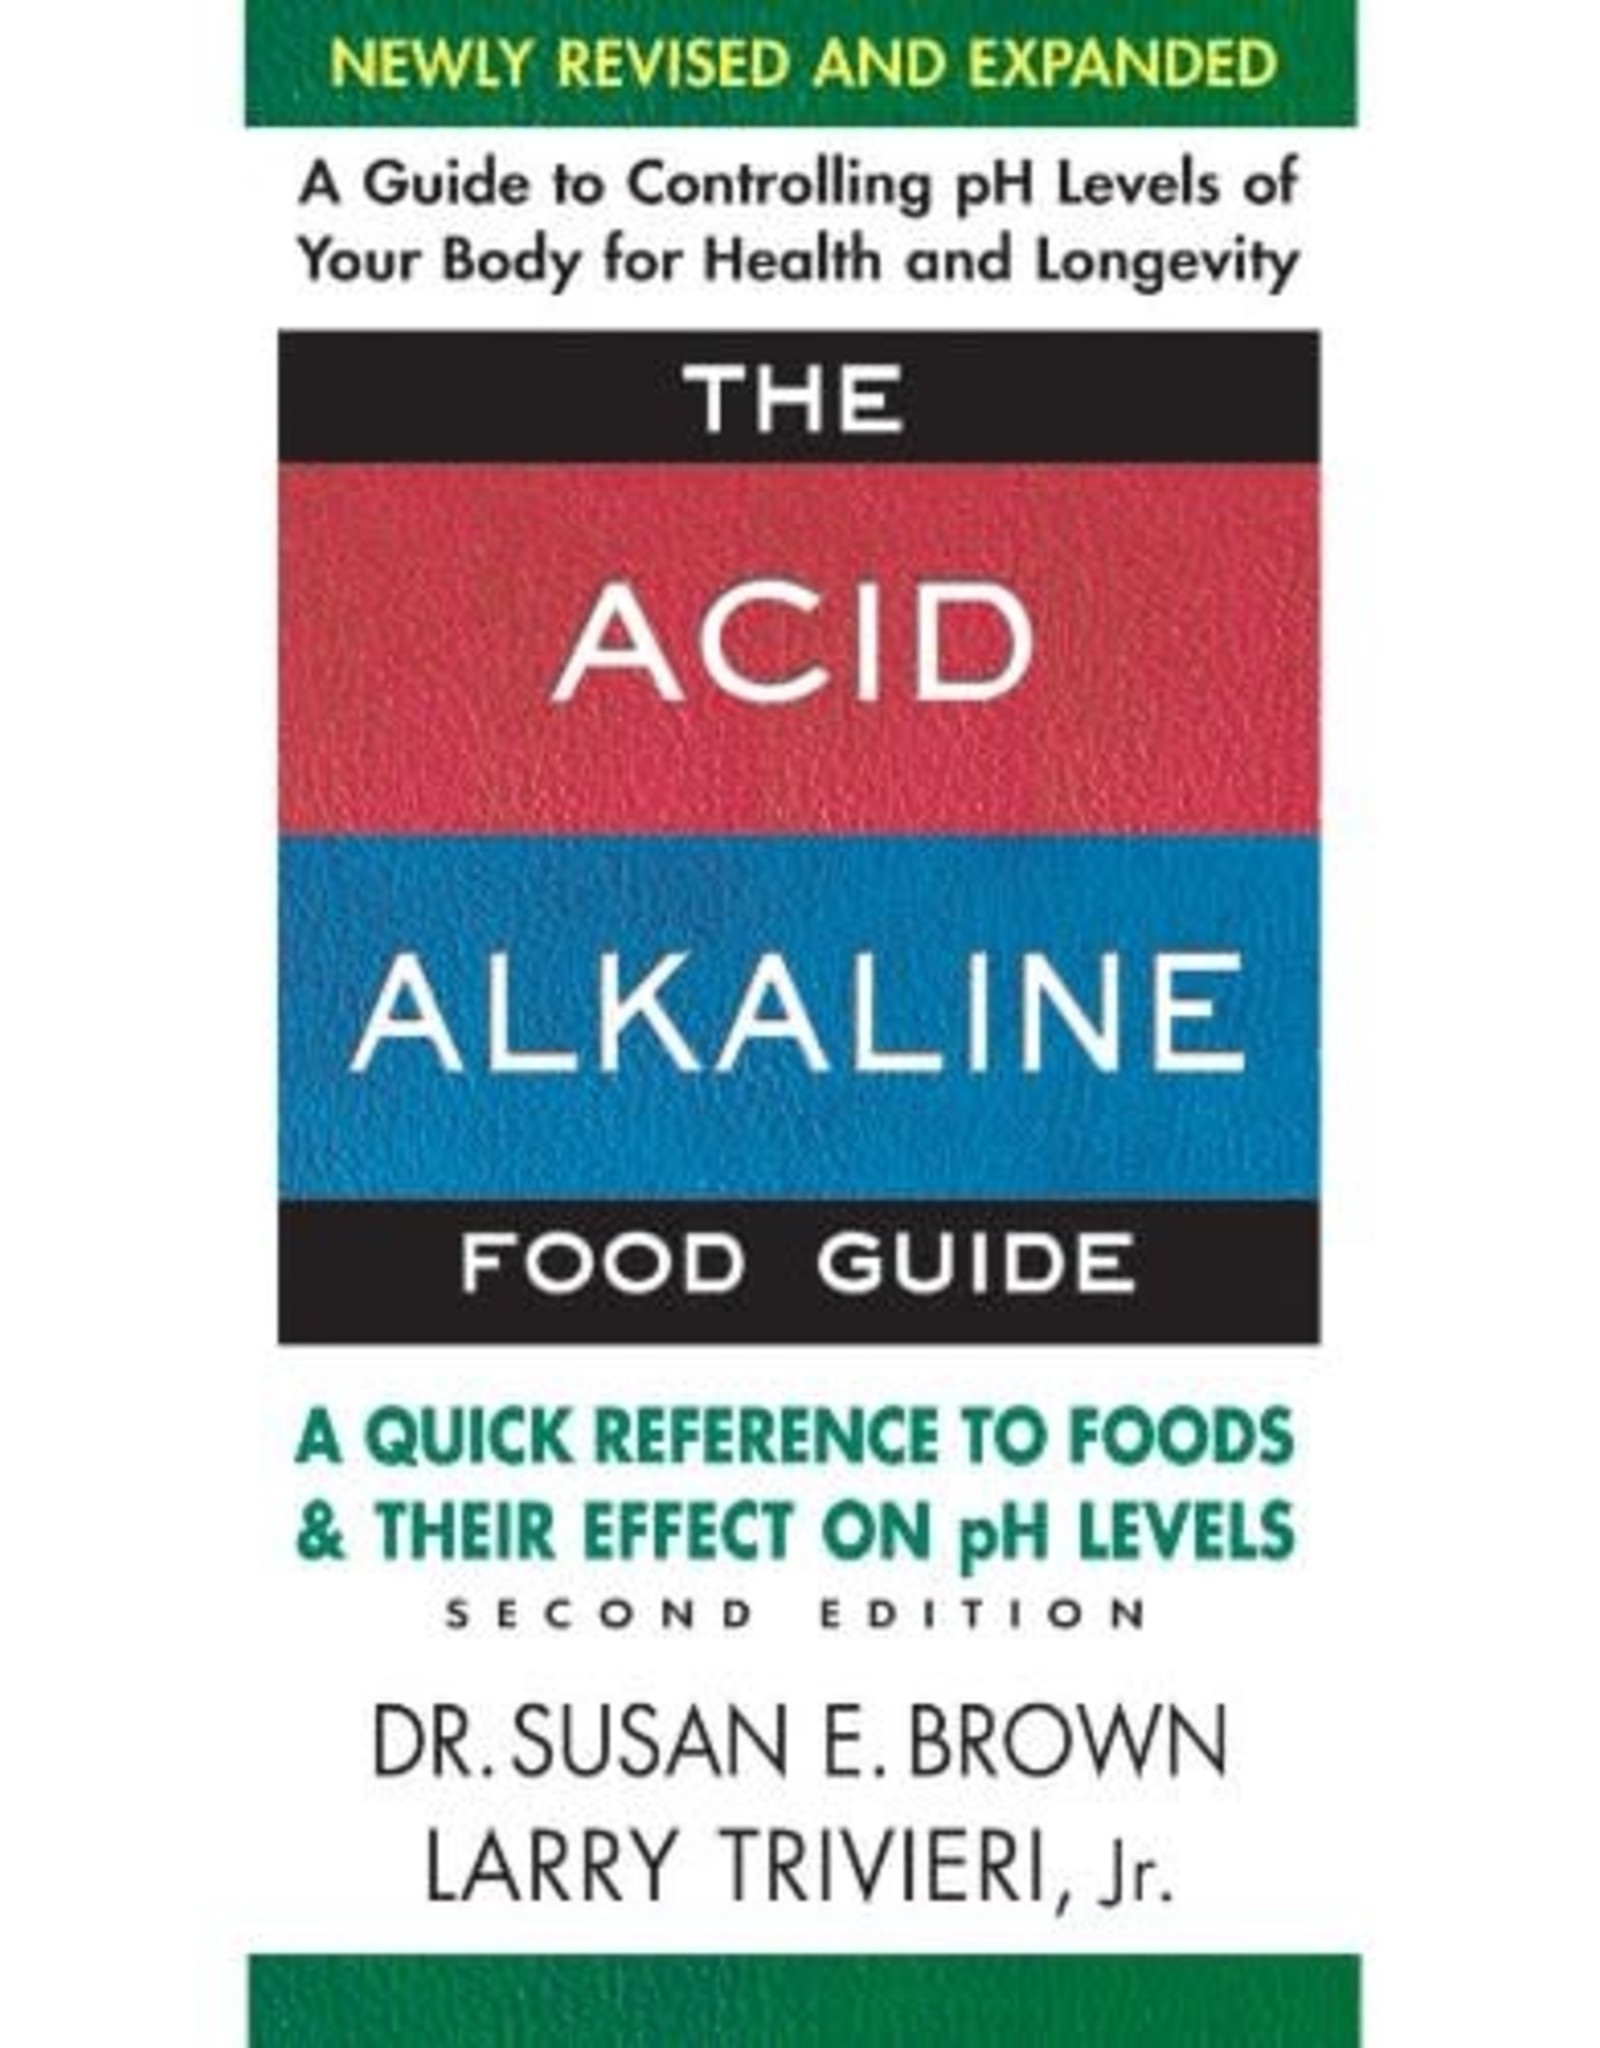 Brumby Sunstate The Acid Alkaline Food Guide Second Edition - Dr Susan E. Brown